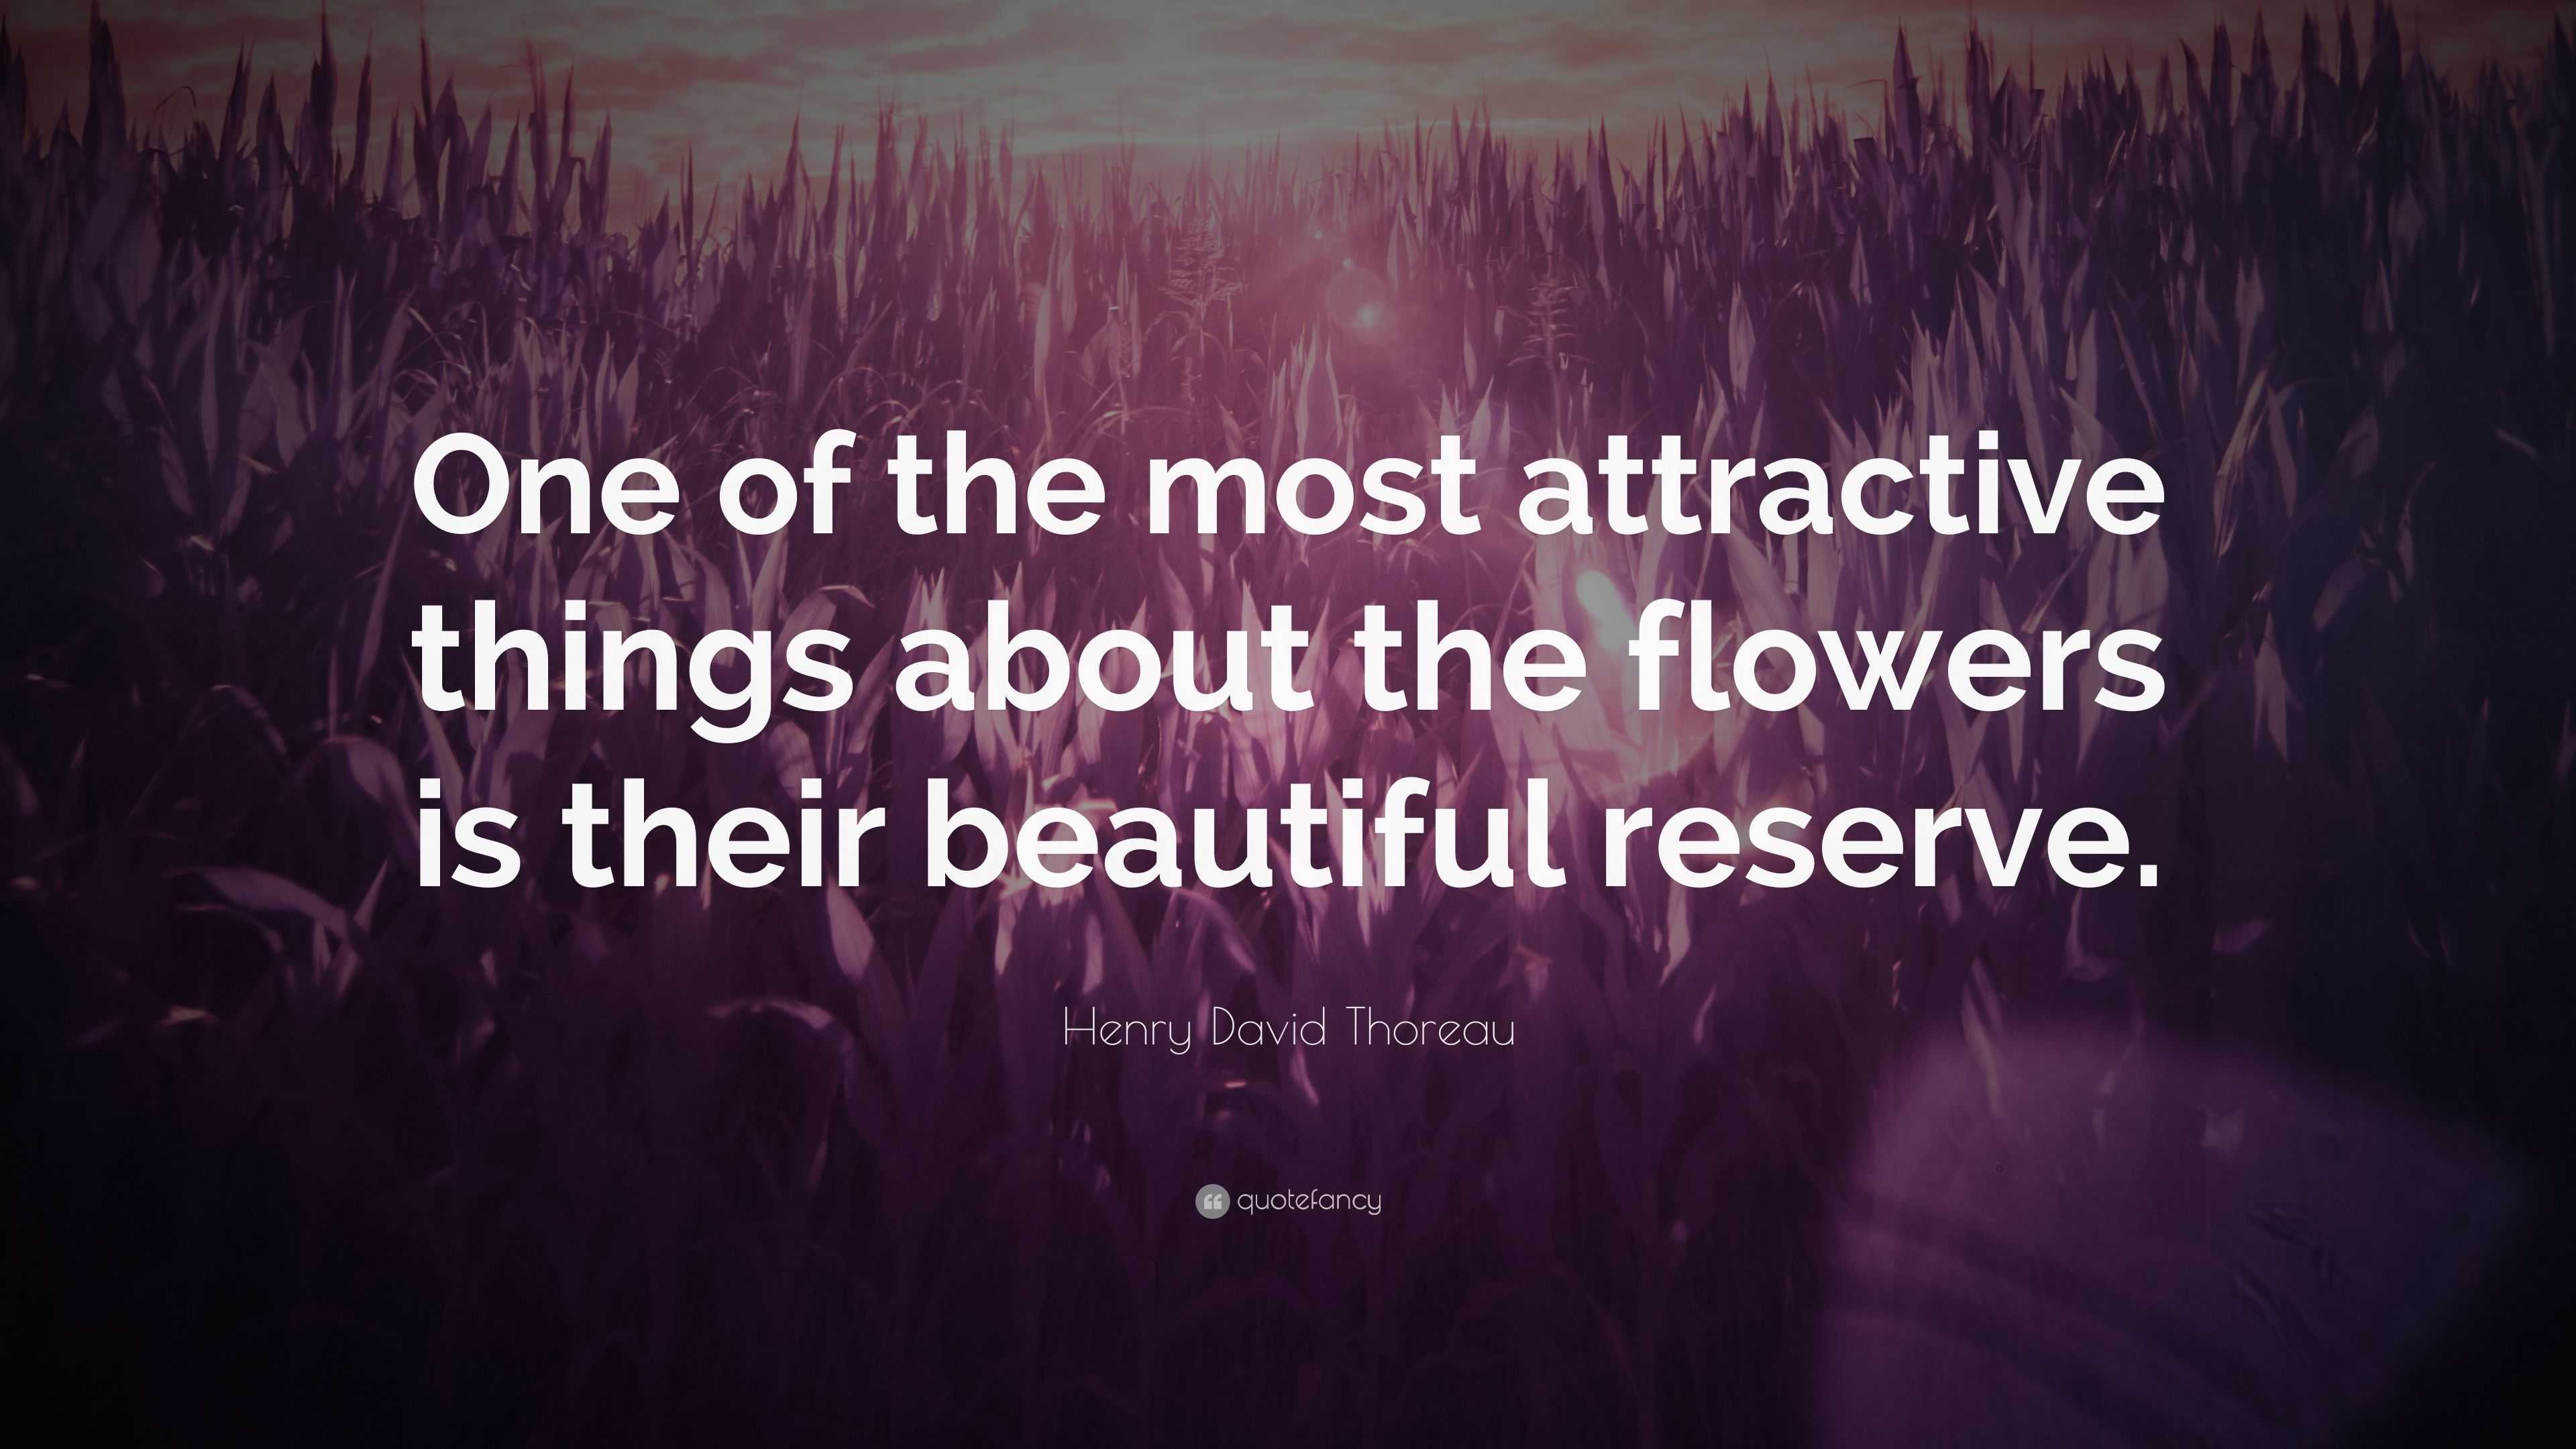 Henry David Thoreau Quote: “One of the most attractive things about the ...